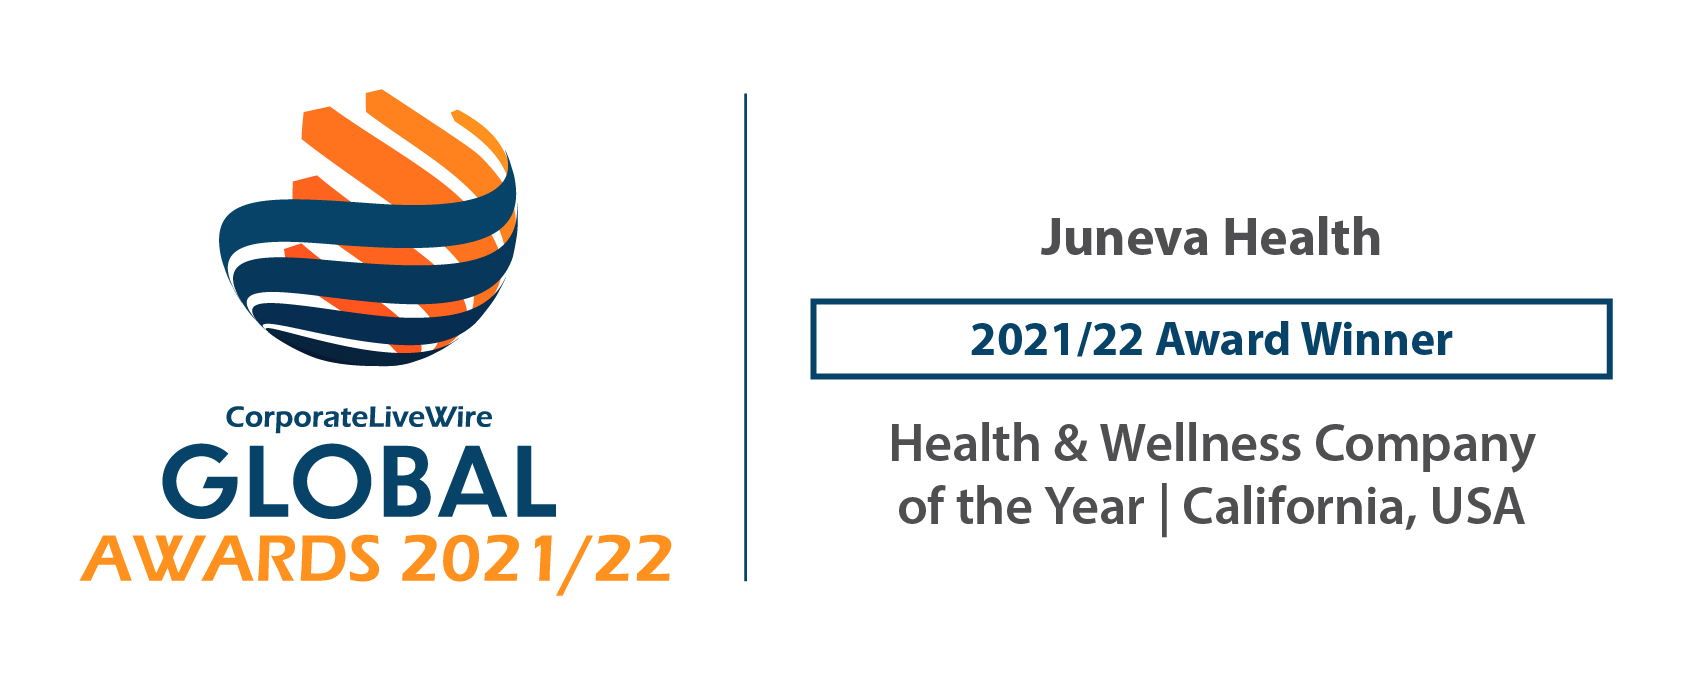 Juneva receives a 2021-22 health and wellness award from CorporateLiveWire.